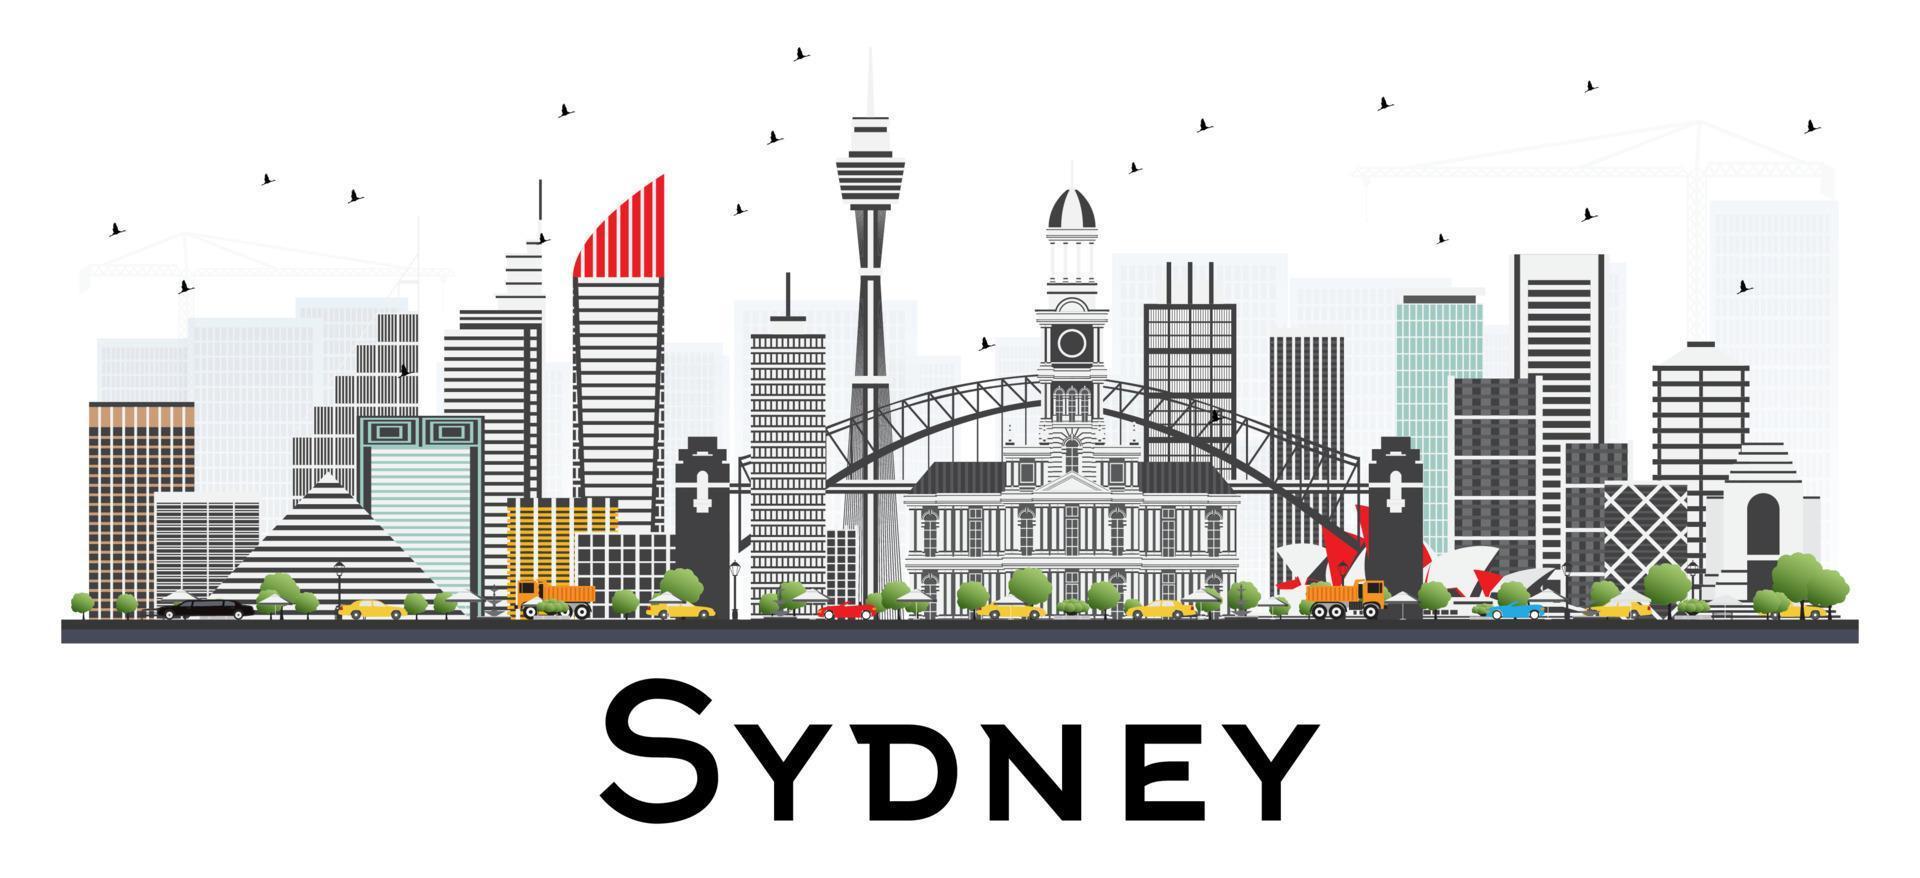 Sydney Australia Skyline with Gray Buildings Isolated on White Background. vector